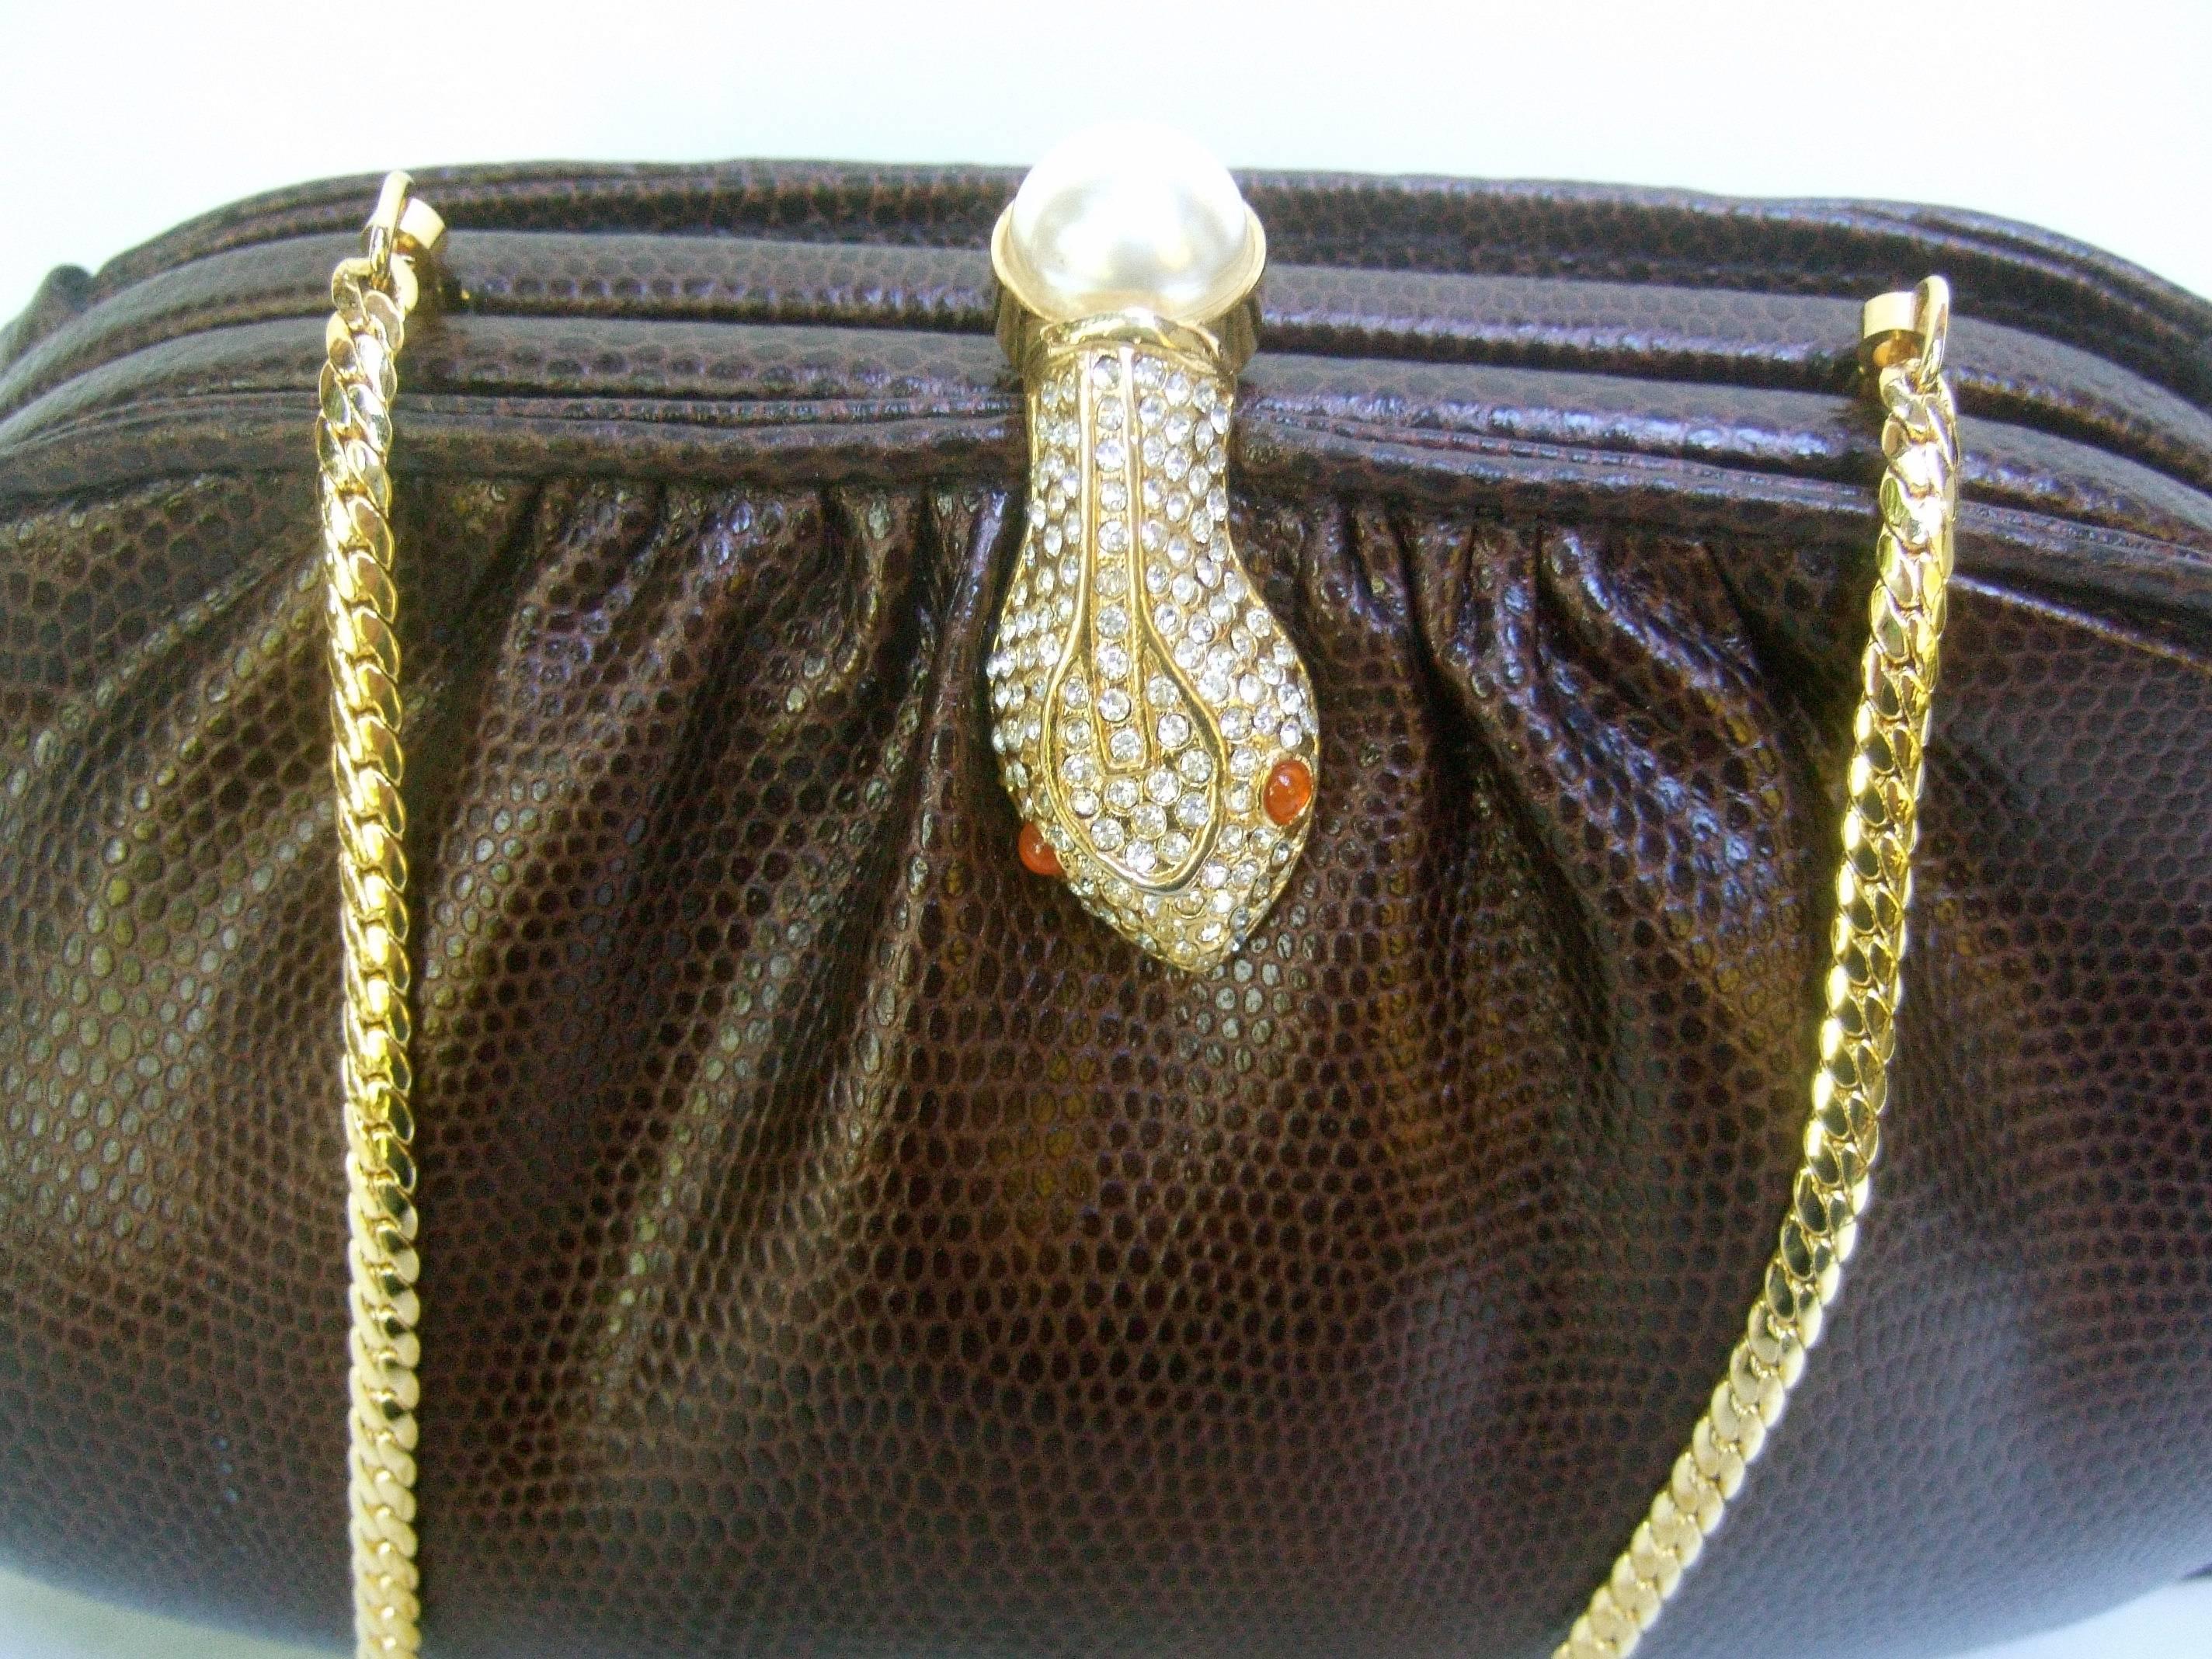 Opulent Jeweled Serpent Clasp Evening Bag For Sale 2